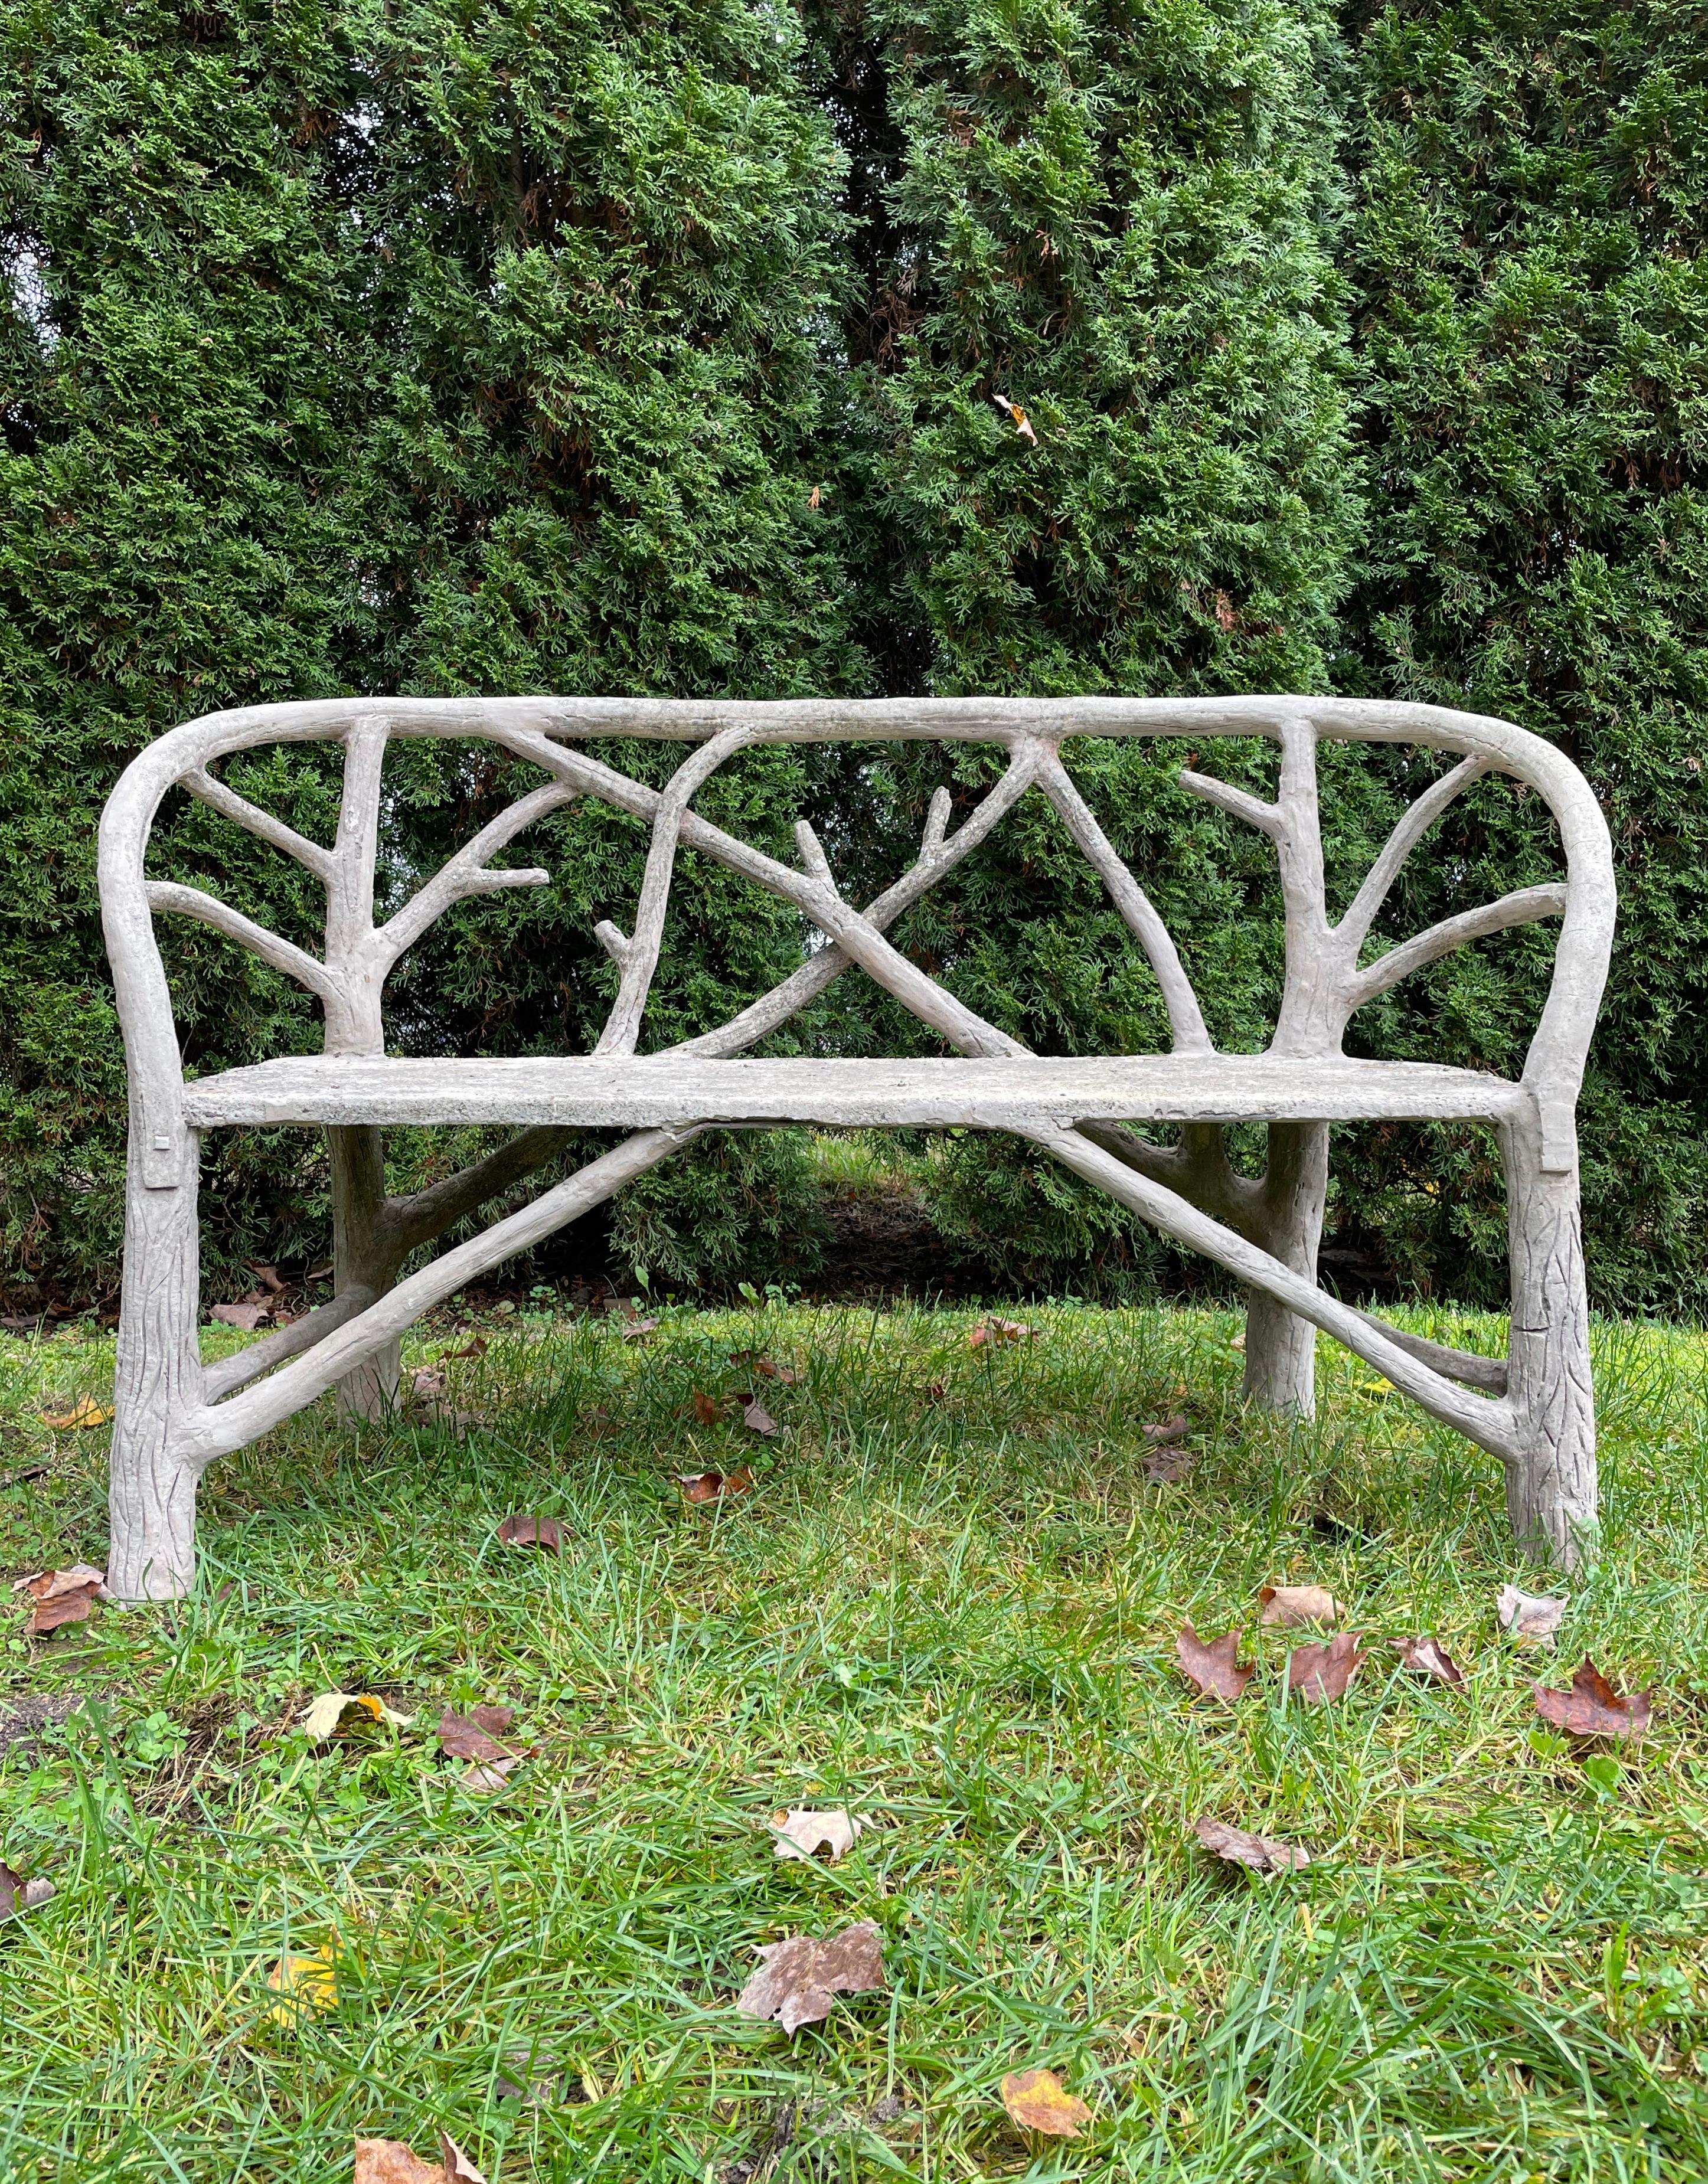 What a stunner! This rare form faux bois bench was hand-made in the 1940s and is in wonderful, restored condition. Its gently-curved back with branch decoration is very comfortable and there are wonderful little details like the “latches” on the